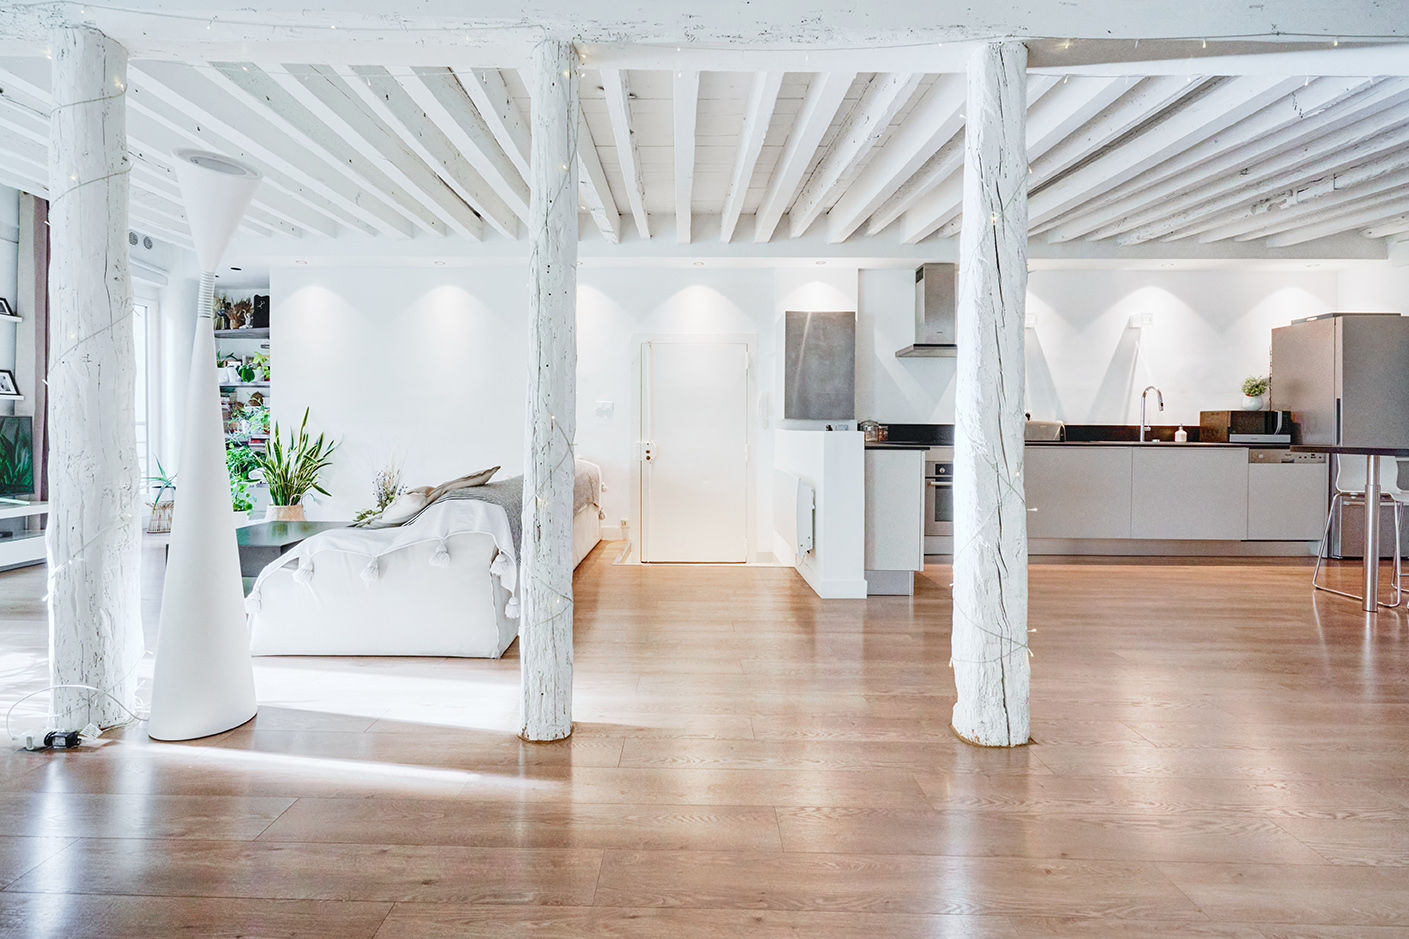 LOFT IN A FORMER CONVENT